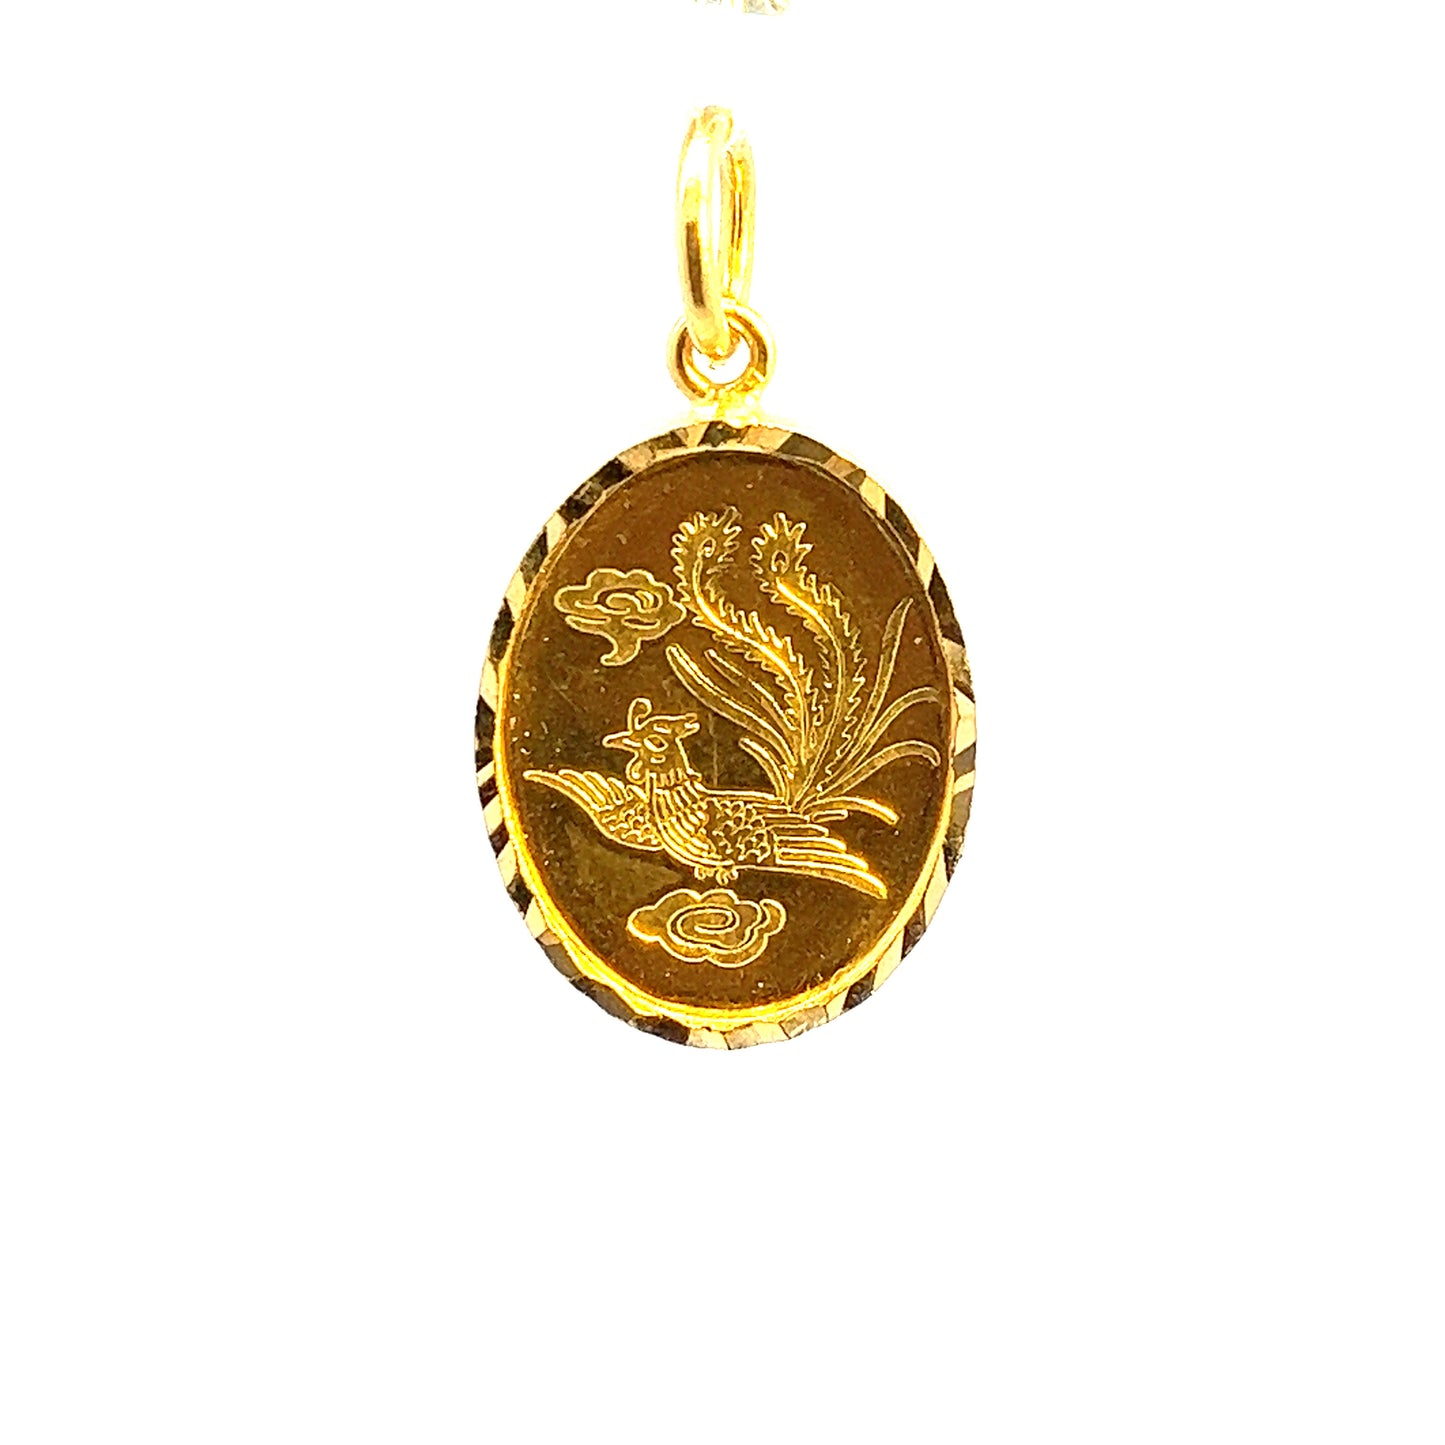 GOLD PENDANT ( 22K ) ( 2.49g ) - 0003140 Chain sold separately